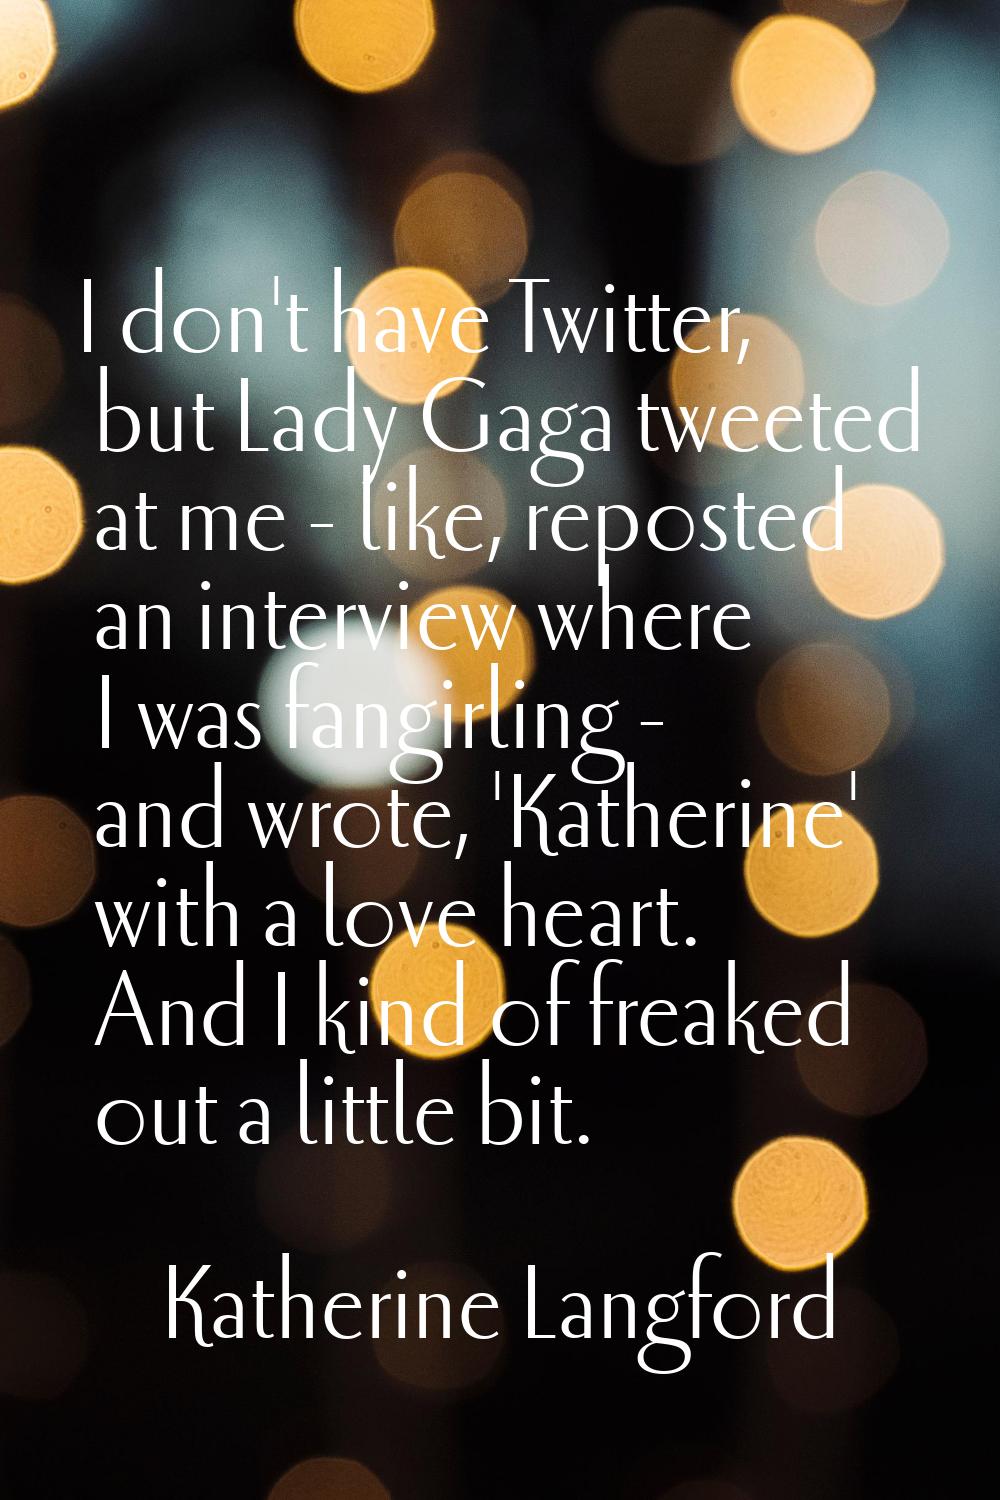 I don't have Twitter, but Lady Gaga tweeted at me - like, reposted an interview where I was fangirl